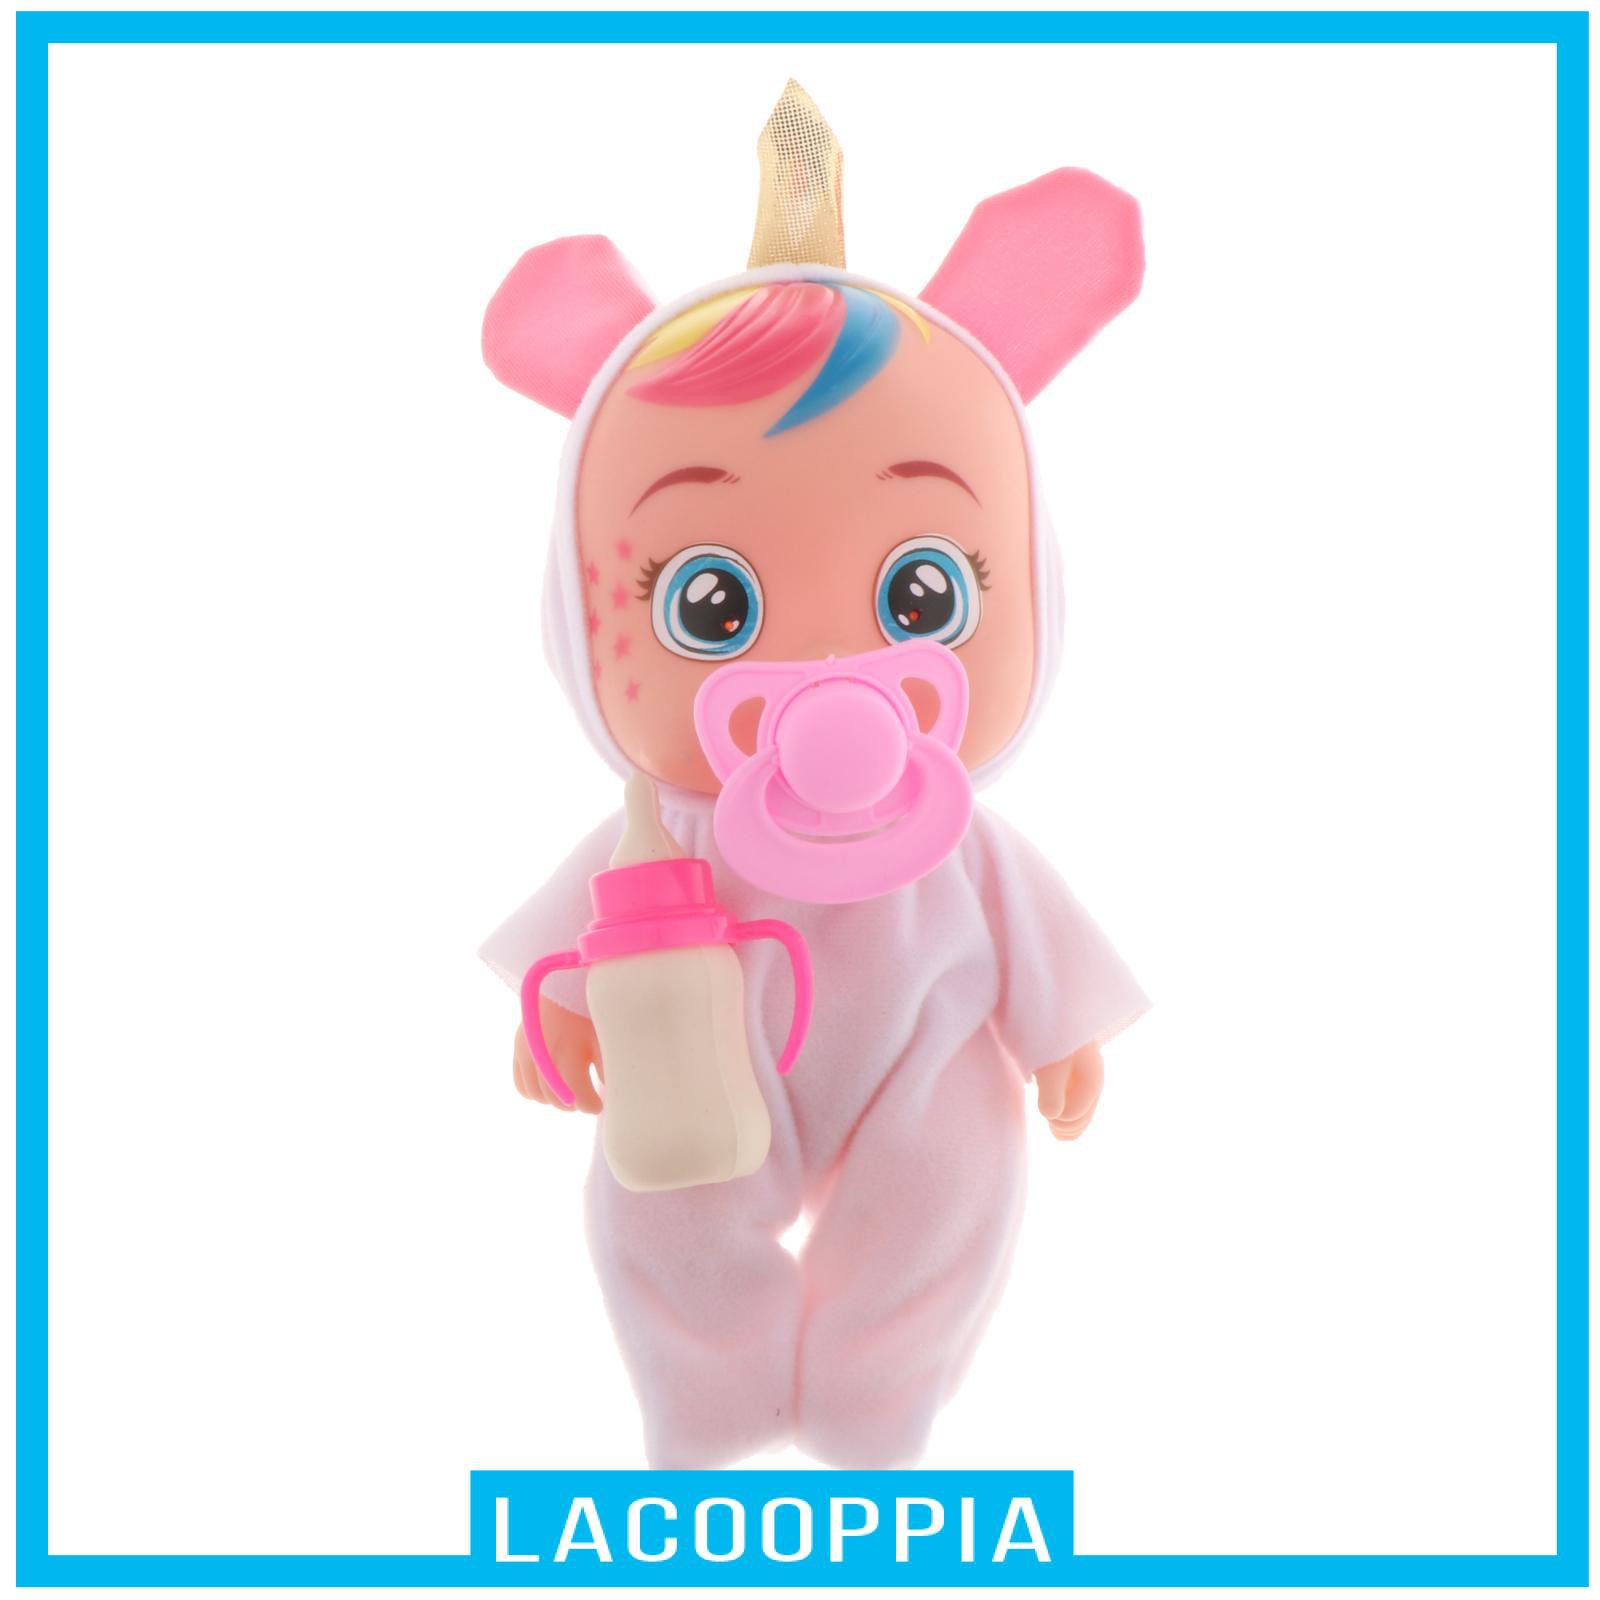 [LACOOPPIA] Electric Interactive Doll Baby Kids Toy Birthday Gift Make Sound Feeding&amp; Crying